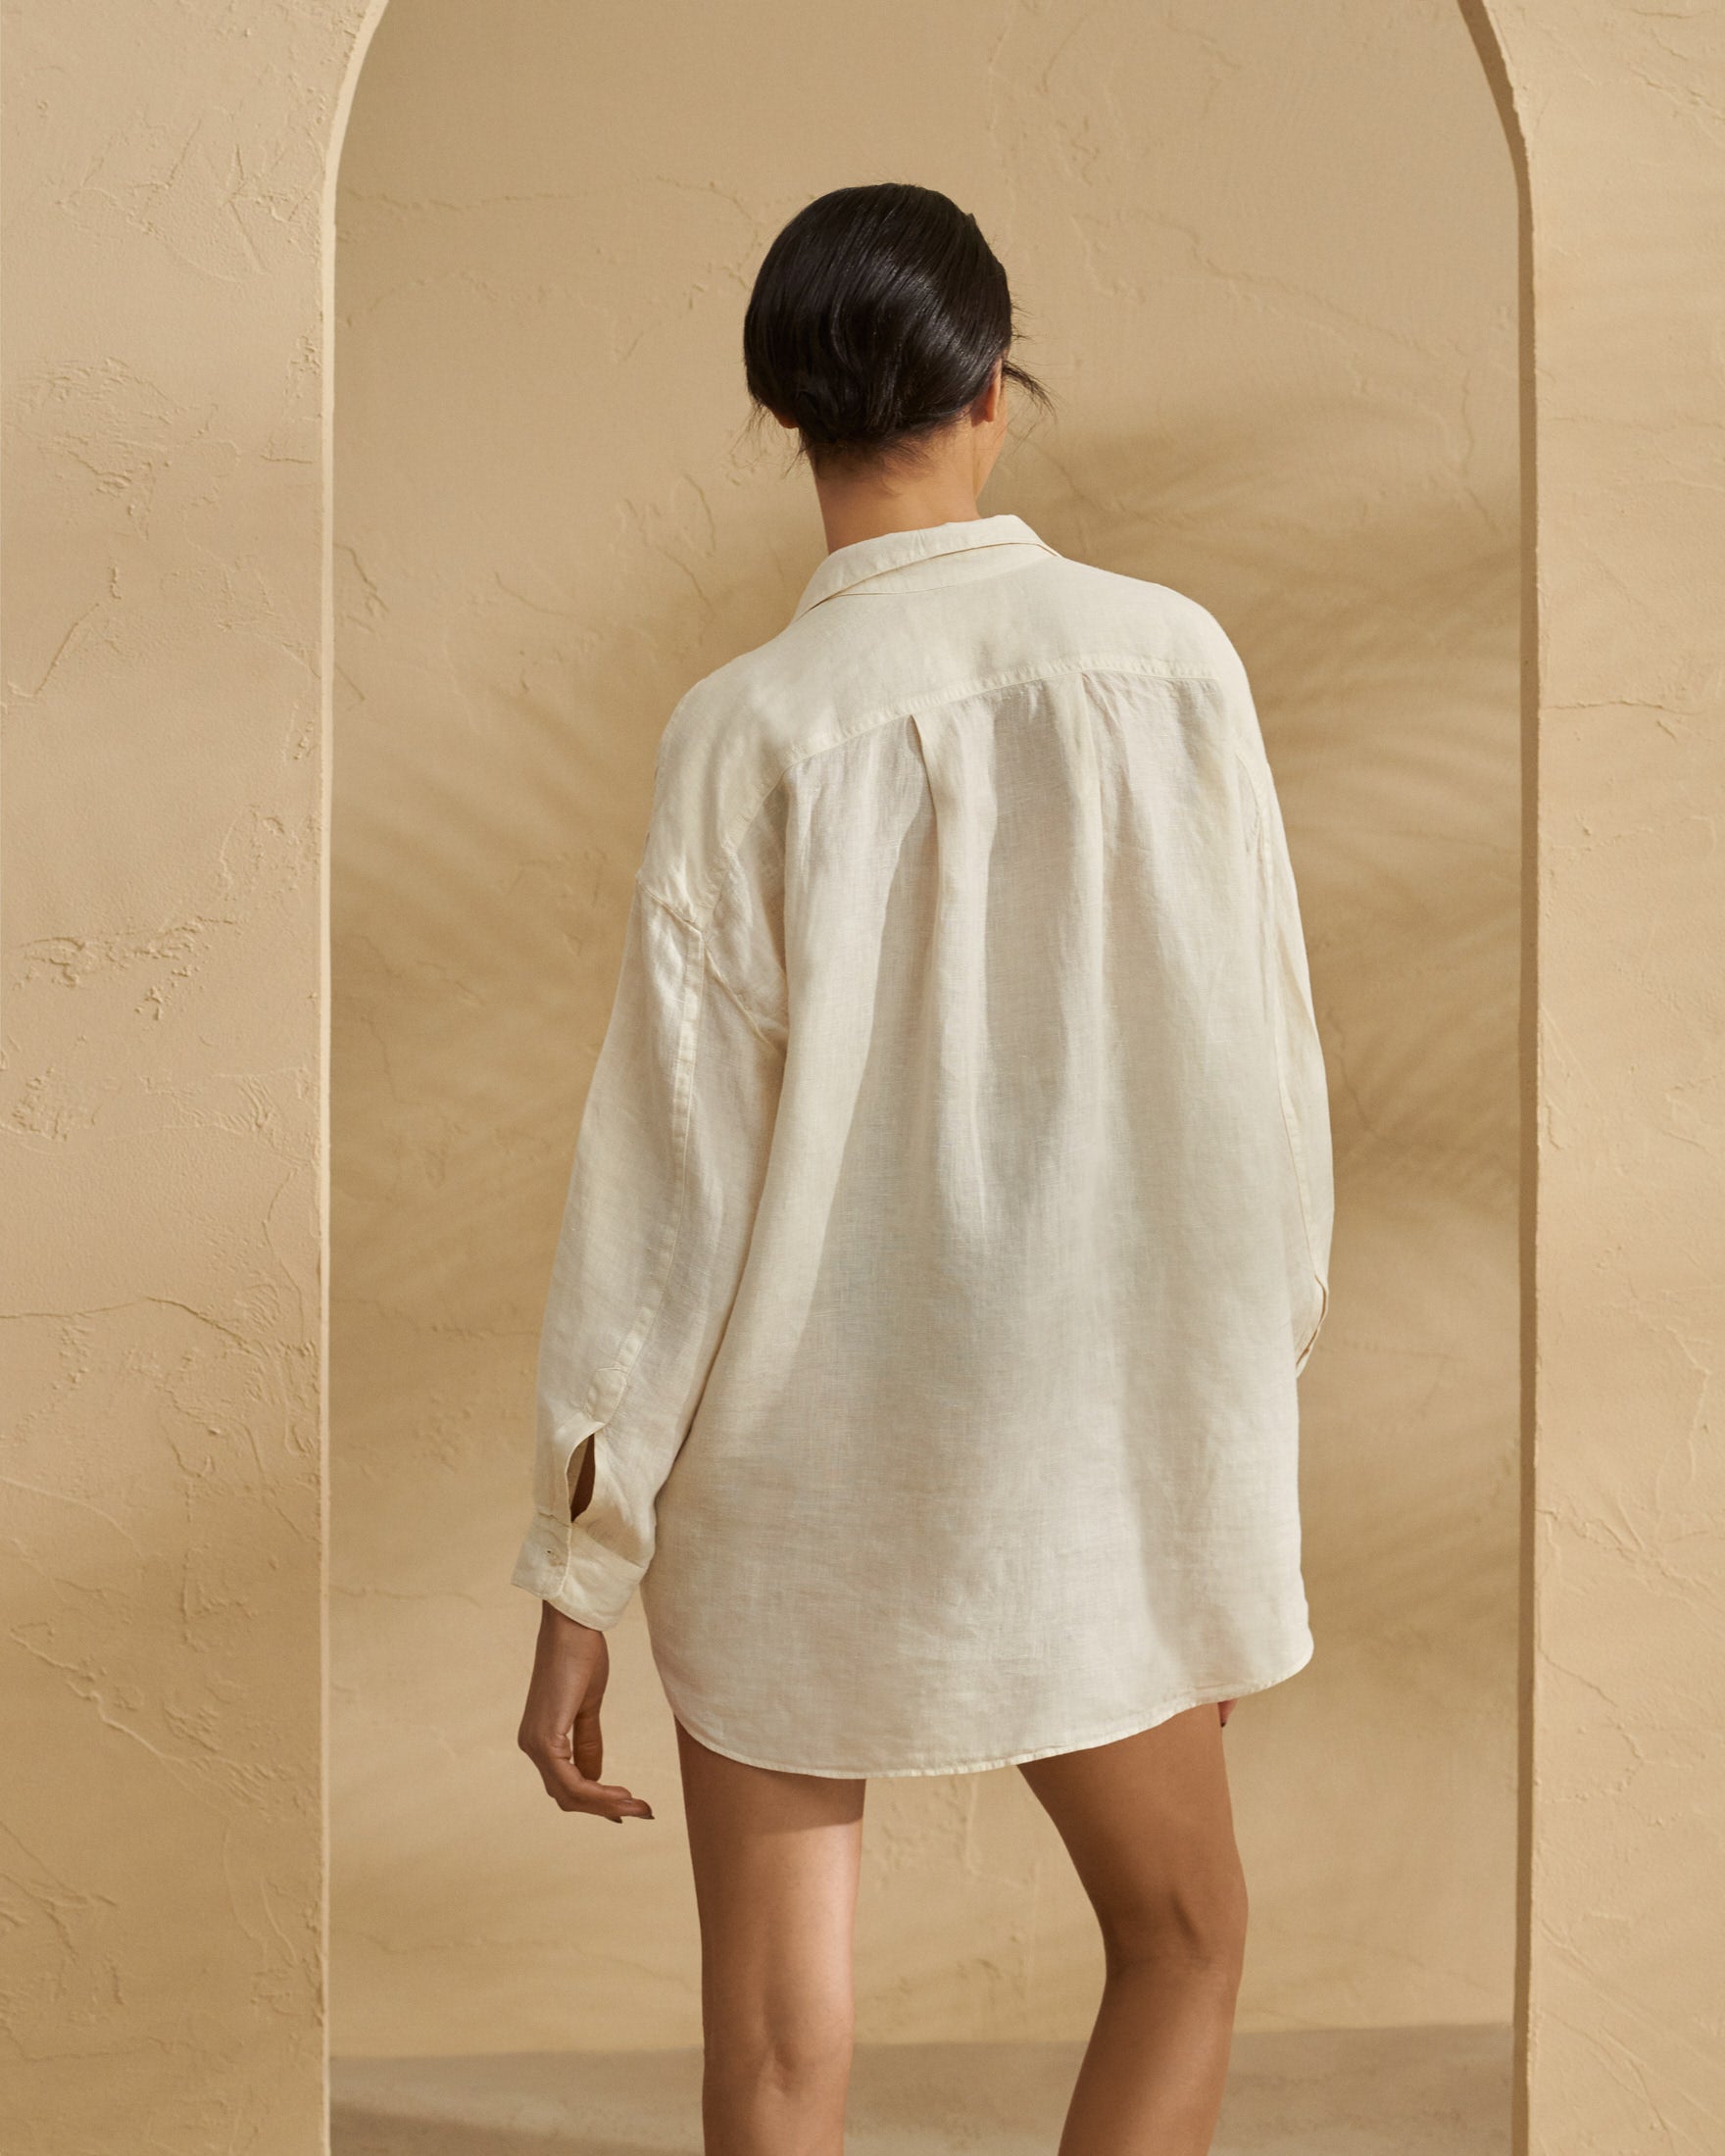 Linen Patmos Shirt - Oversize Fit with Pointed Collar - Eggnog